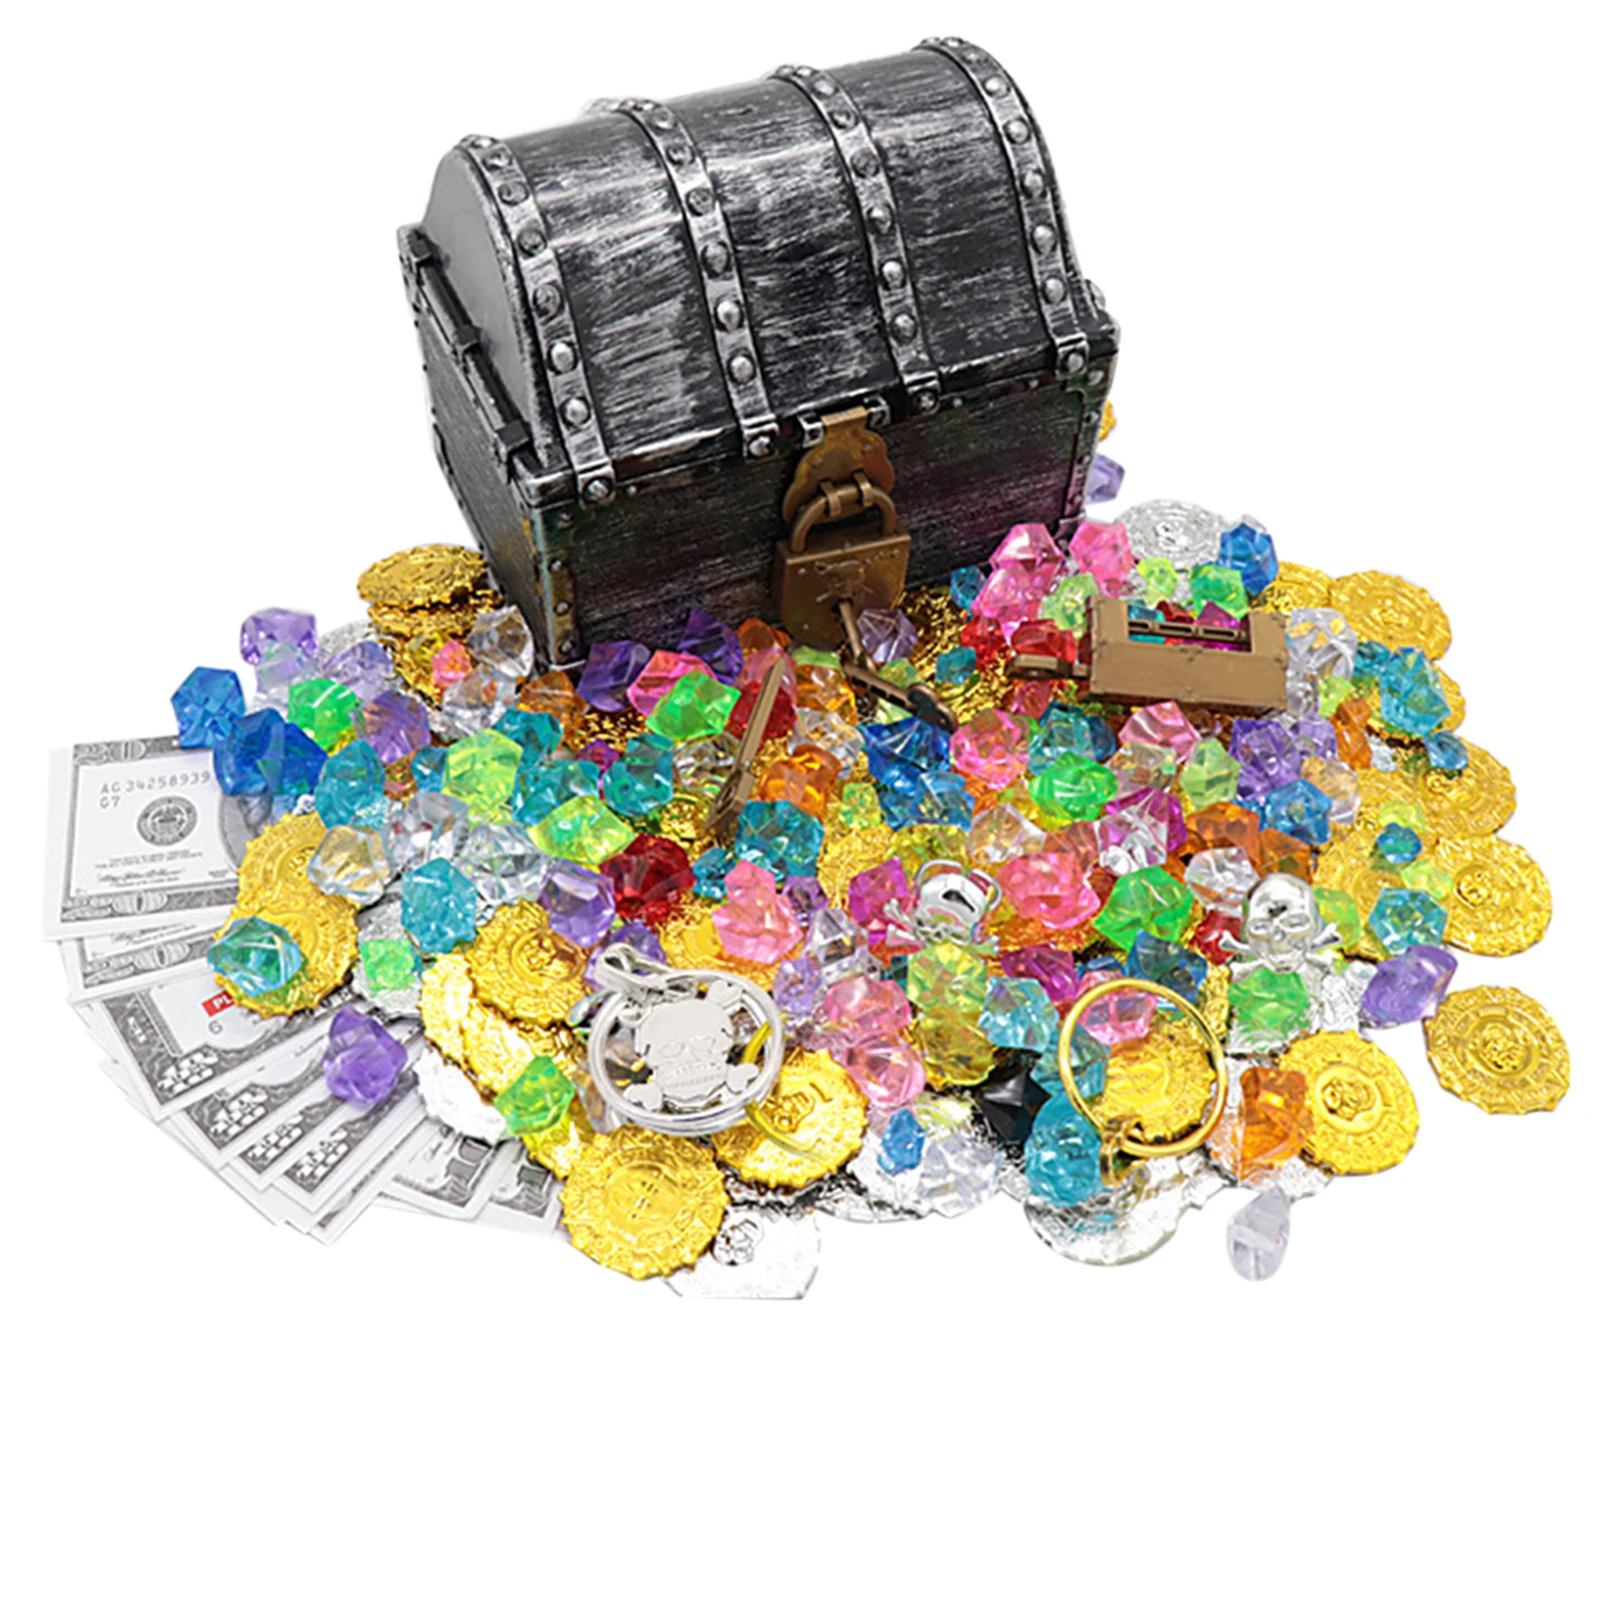 

Gold Coins Storage Box Antique Pirate Treasure Chest Gift Gems Rings Earrings Trinket Party Favors With Lock Kids Toy Playset